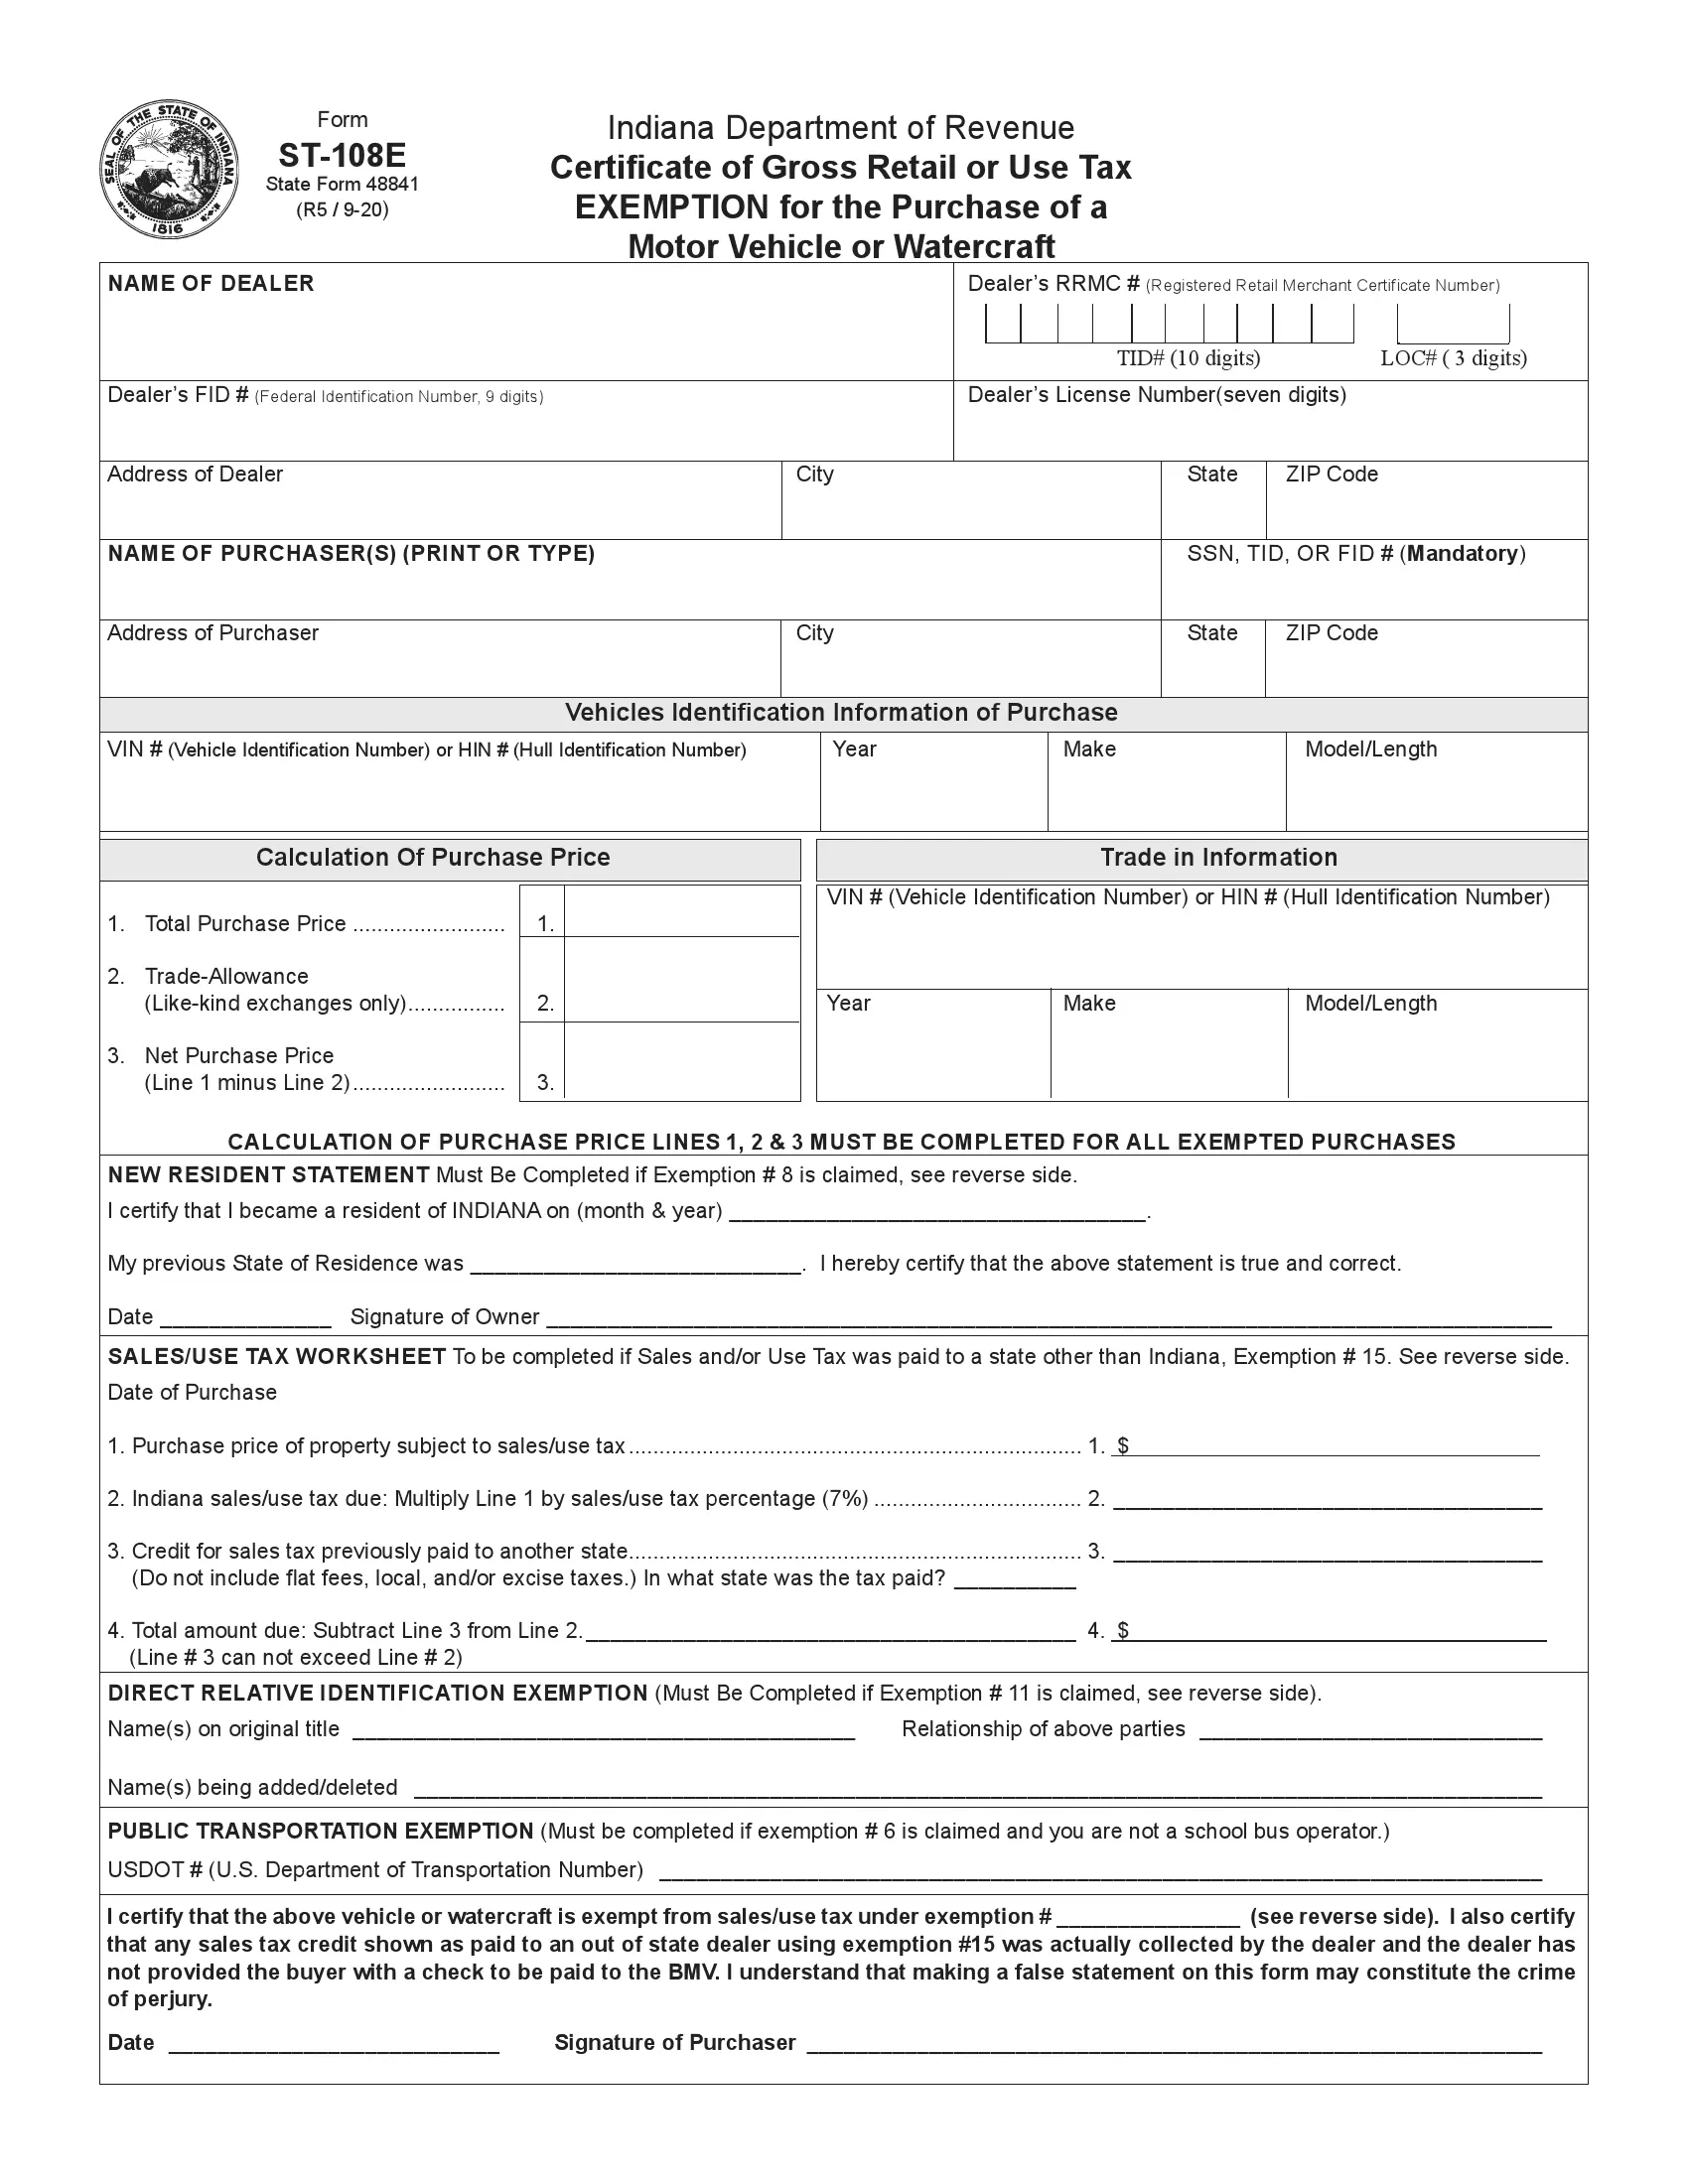 (Boat) Form 48841